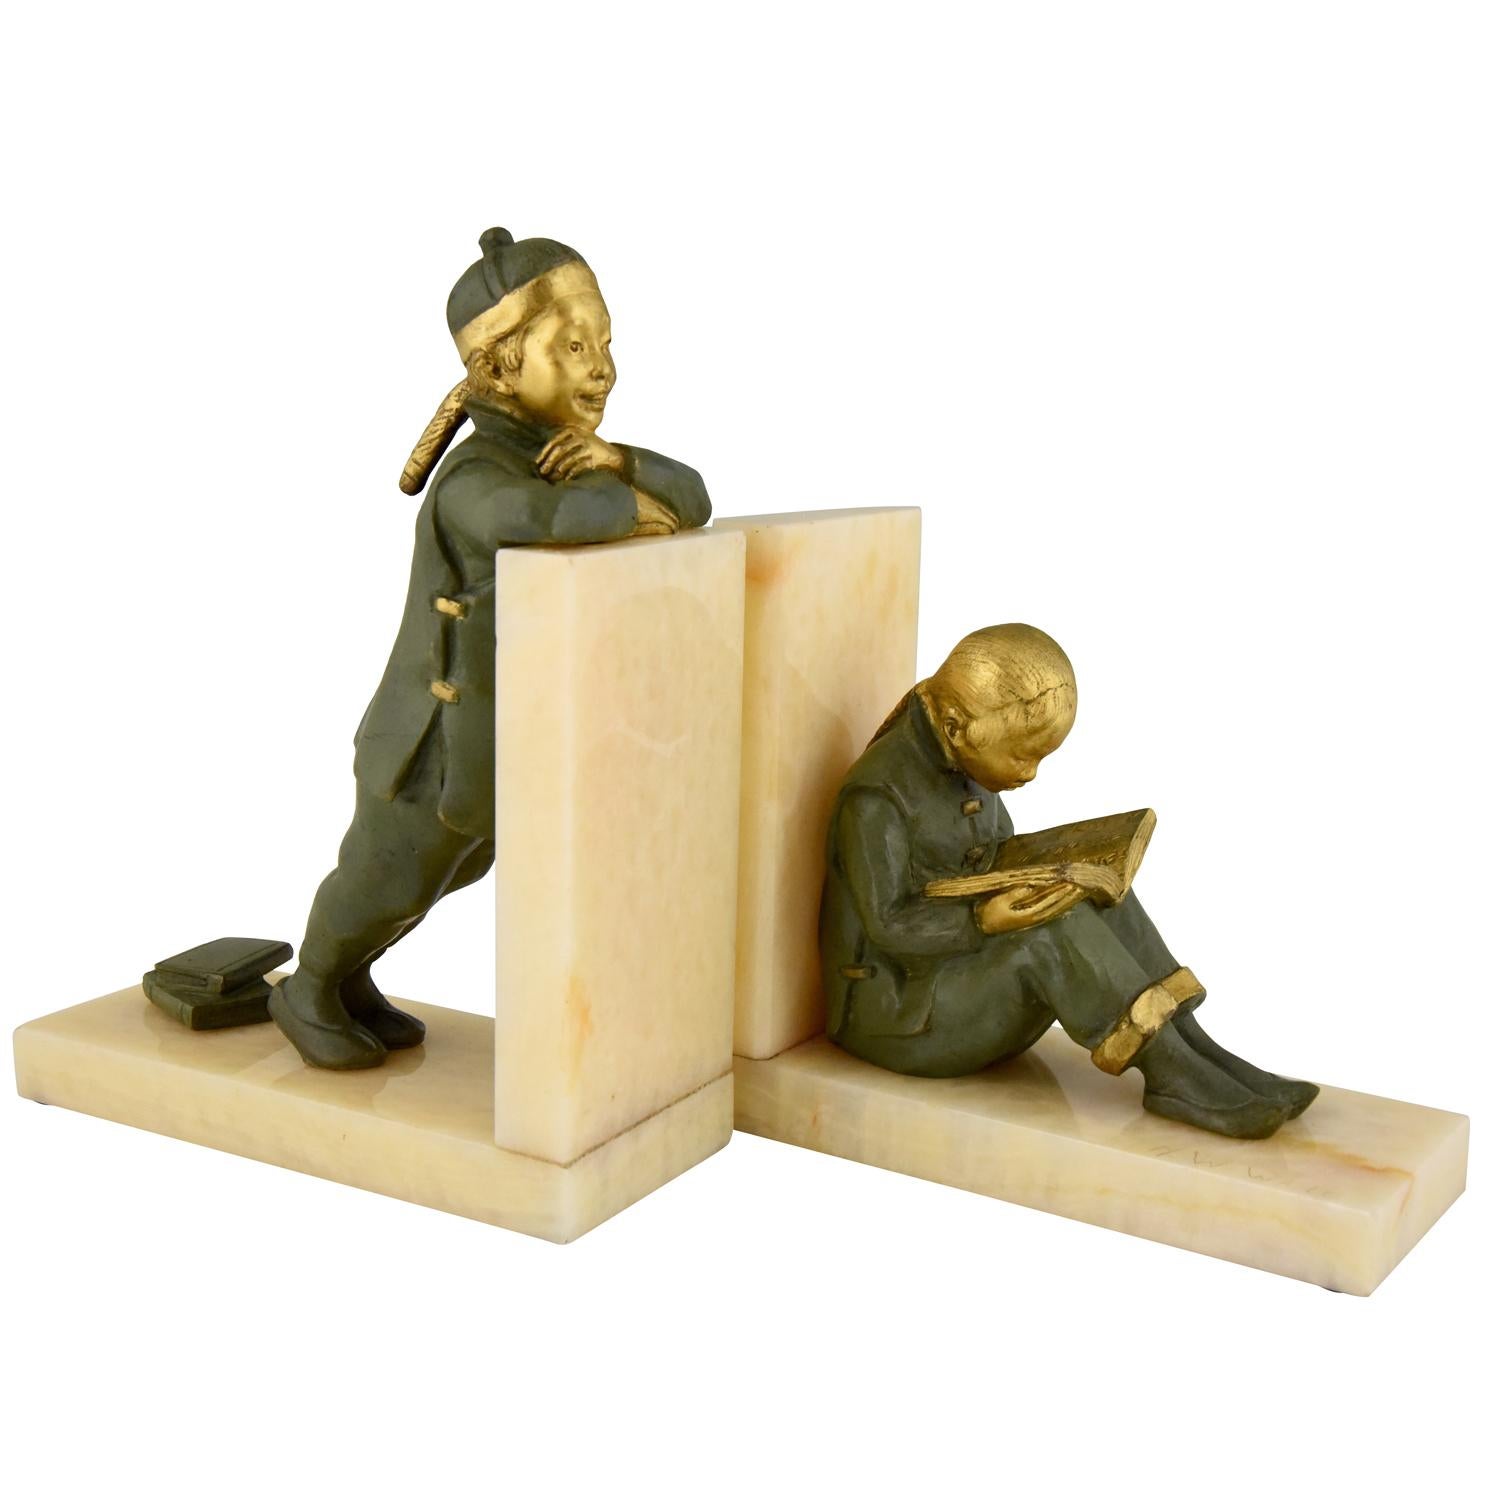 Lovely pair of Art Deco bronze bookends with Chinese students, one is reading the other is standing. The sculpture have a lovely green and golden patina. They are mounted on fine onyx bases, circa 1925.
The bookends are signed by Mabel White, an